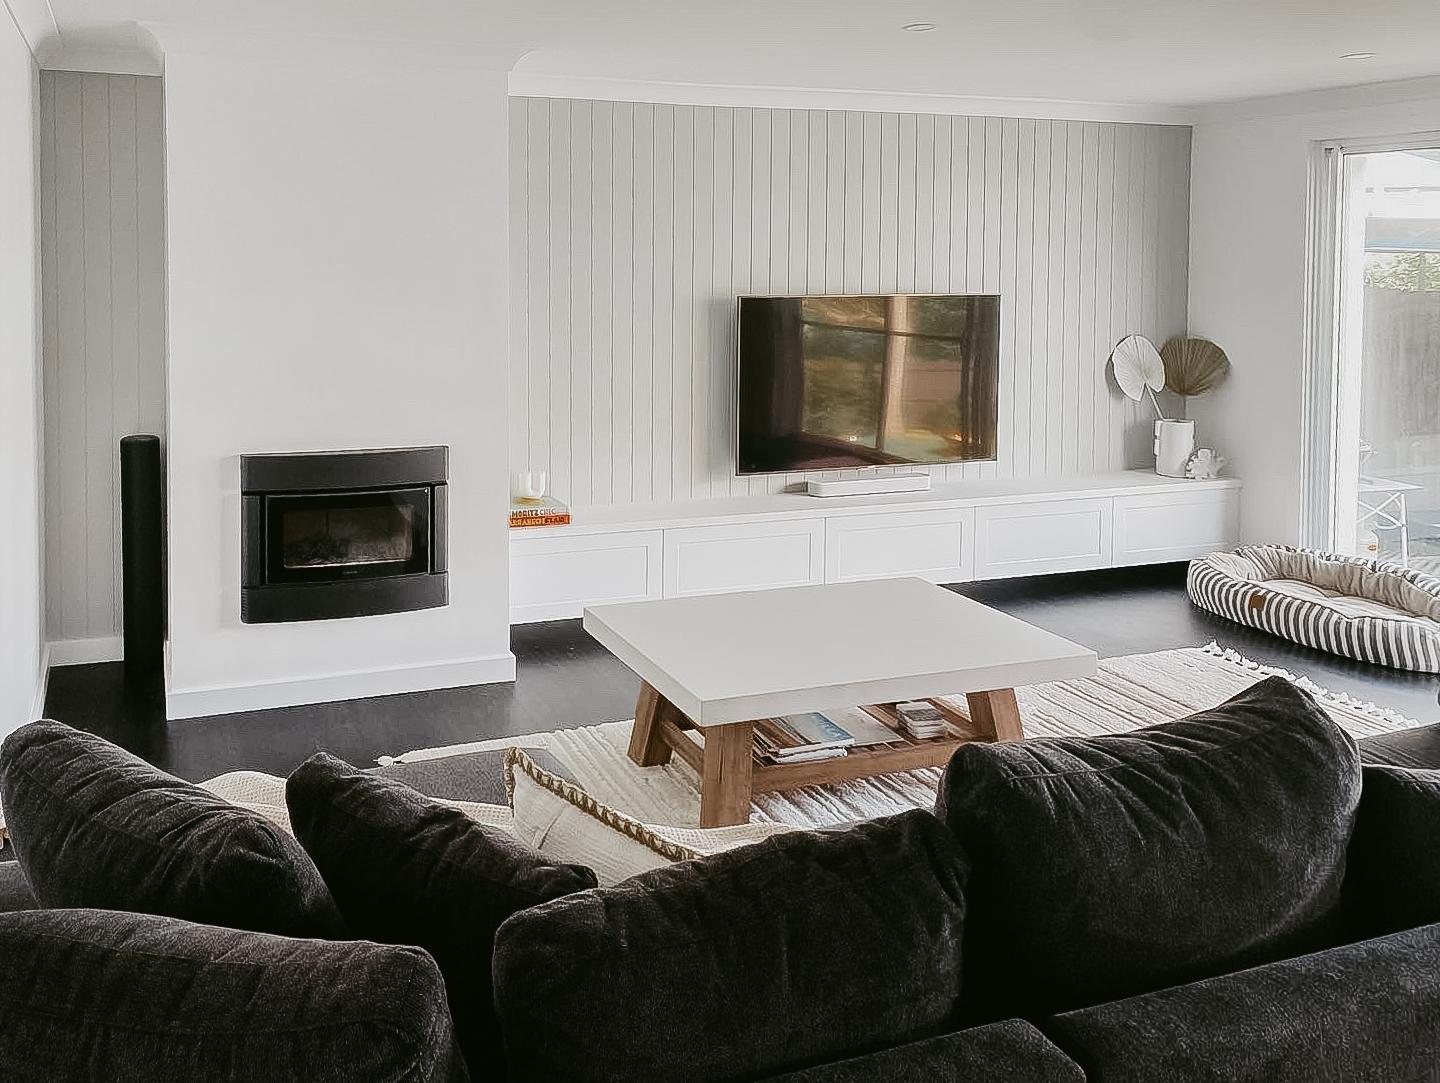 Renovation Builder Local to the Central Coast - Living Room